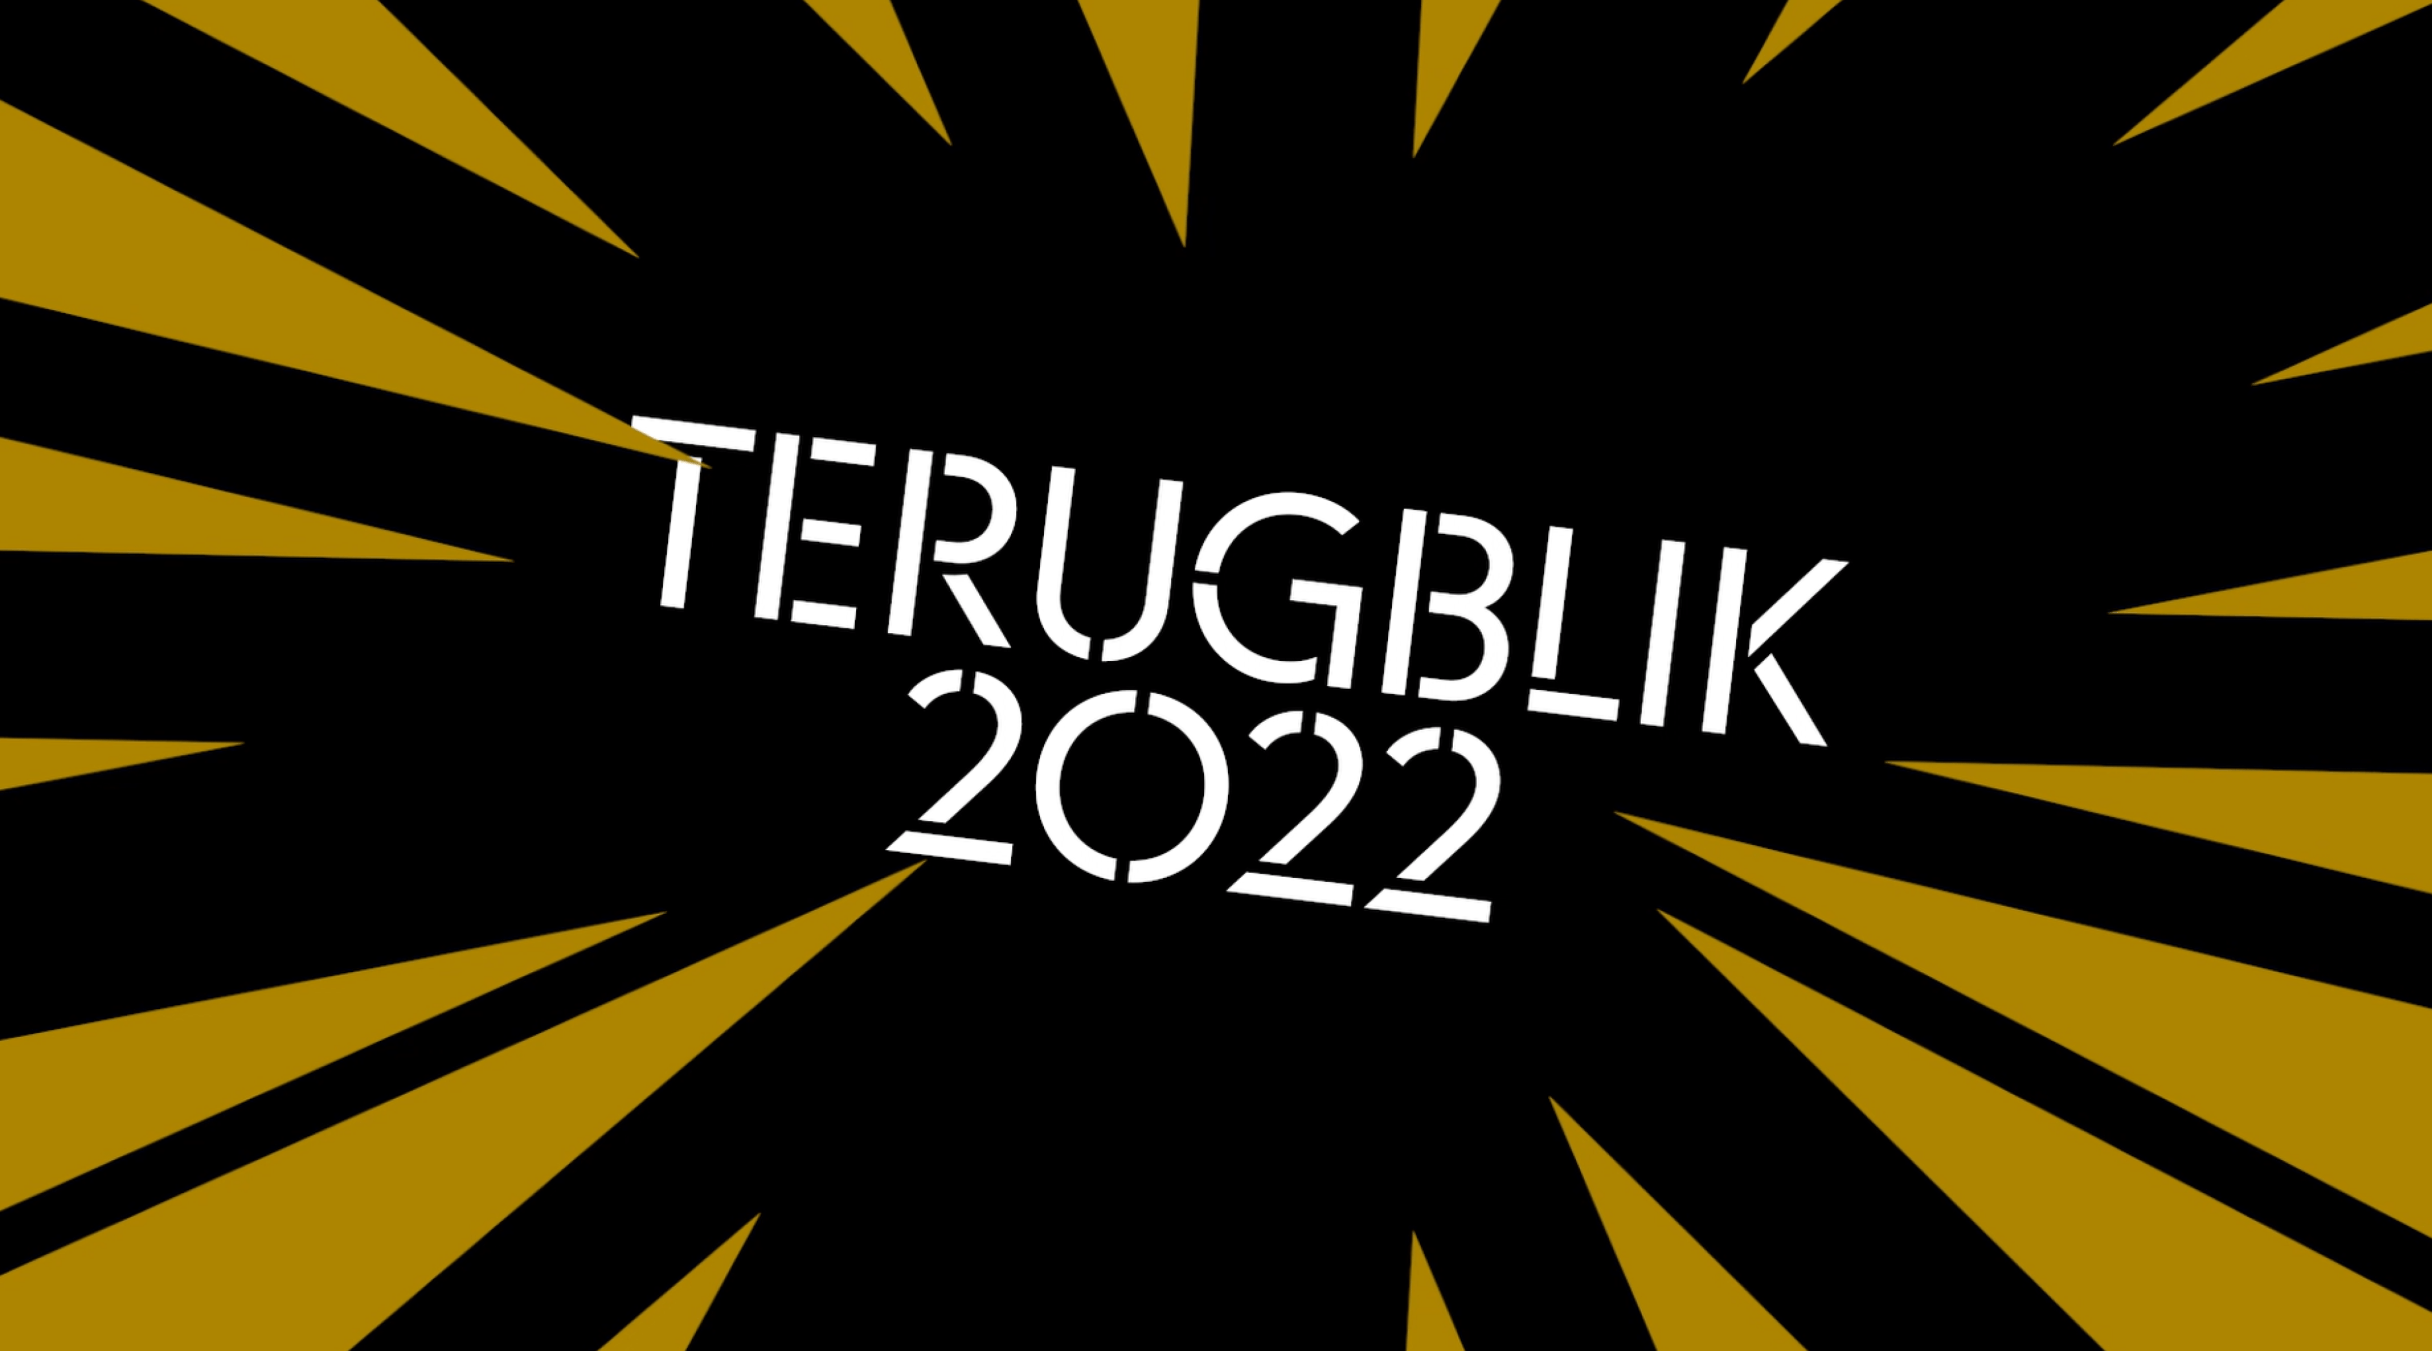 welcome to the retrospective 2022